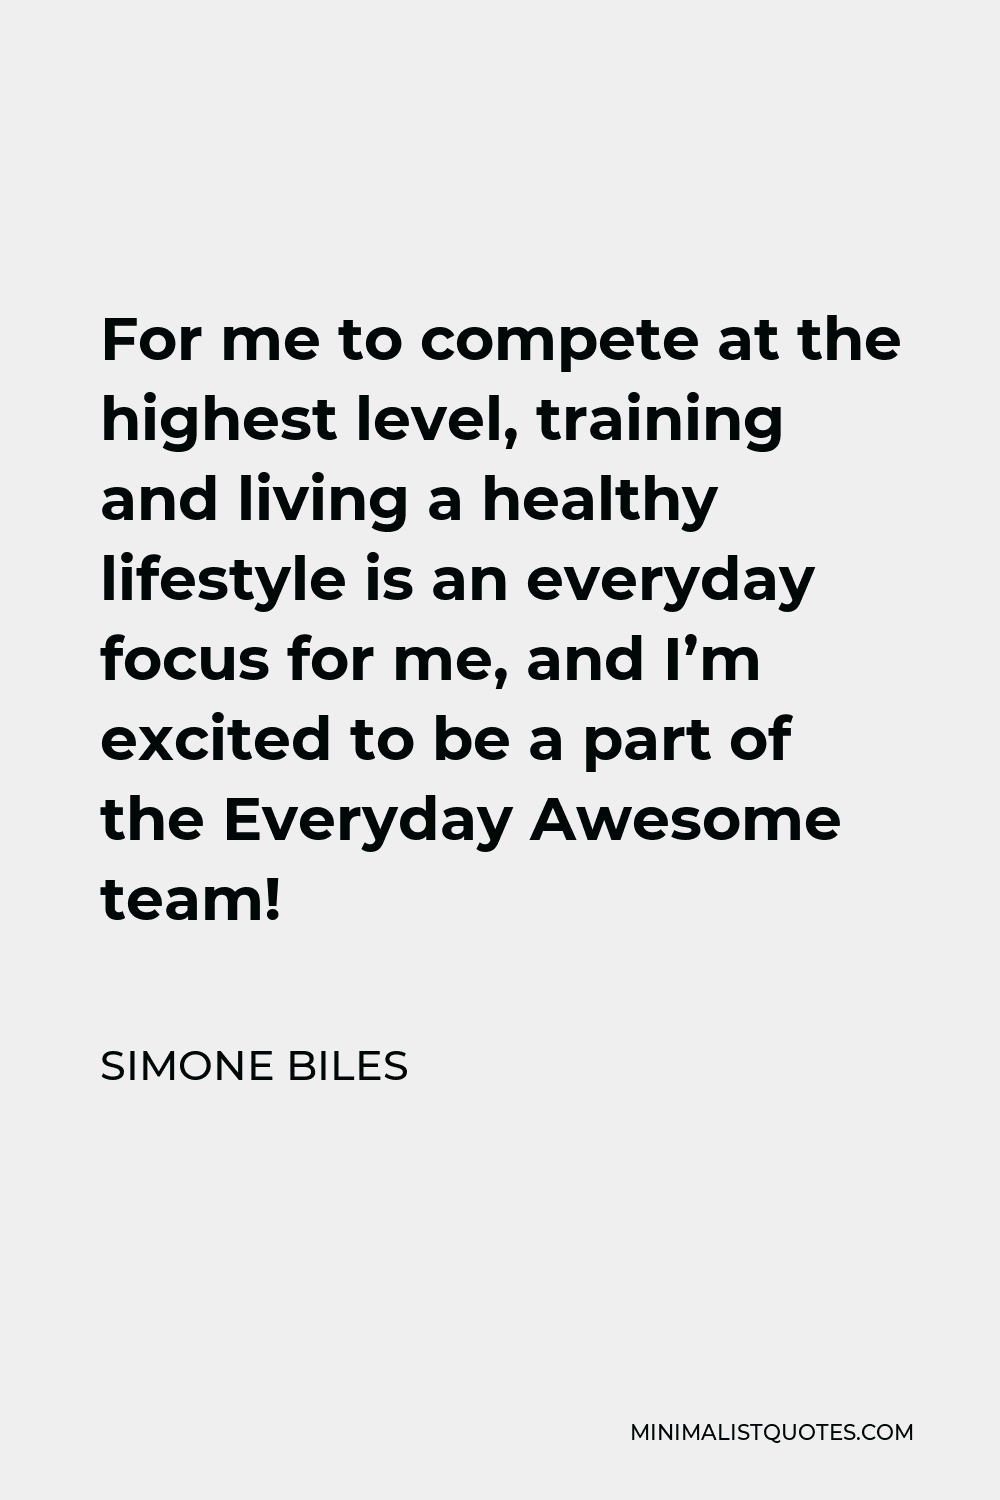 Simone Biles Quote - For me to compete at the highest level, training and living a healthy lifestyle is an everyday focus for me, and I’m excited to be a part of the Everyday Awesome team!